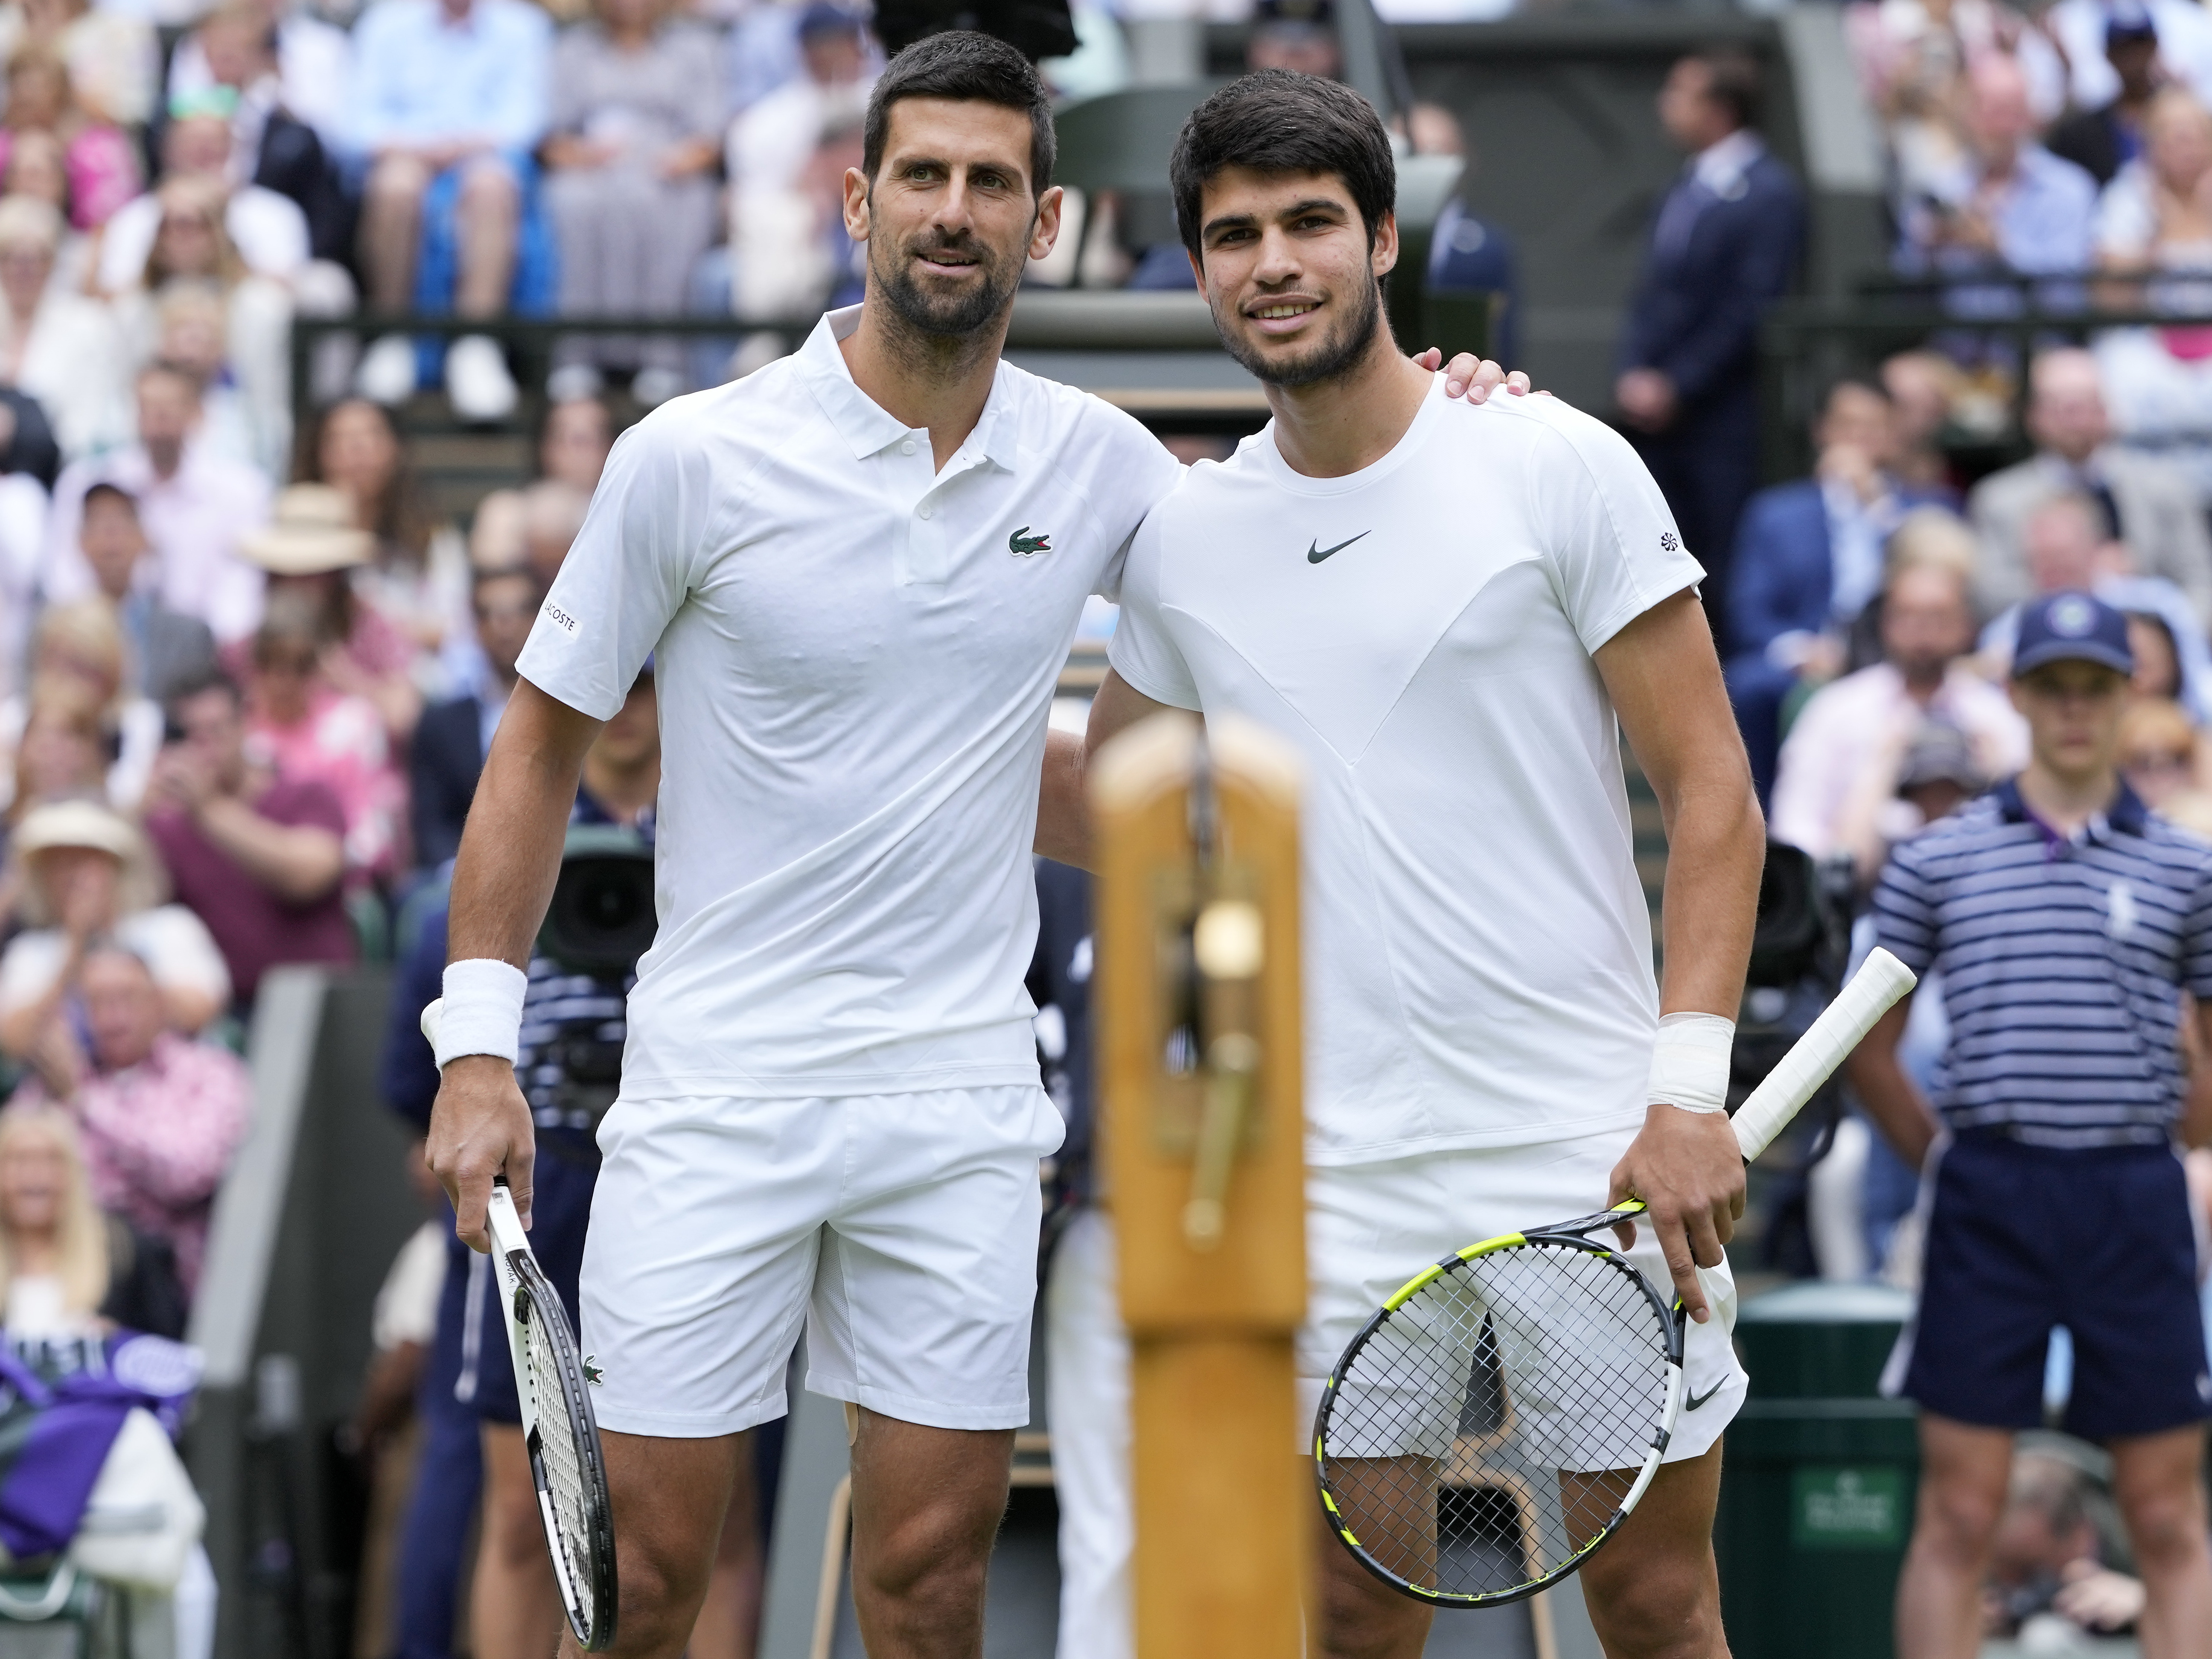 Alcaraz and Djokovic symbolize the transition in tennis as US Open is set to begin